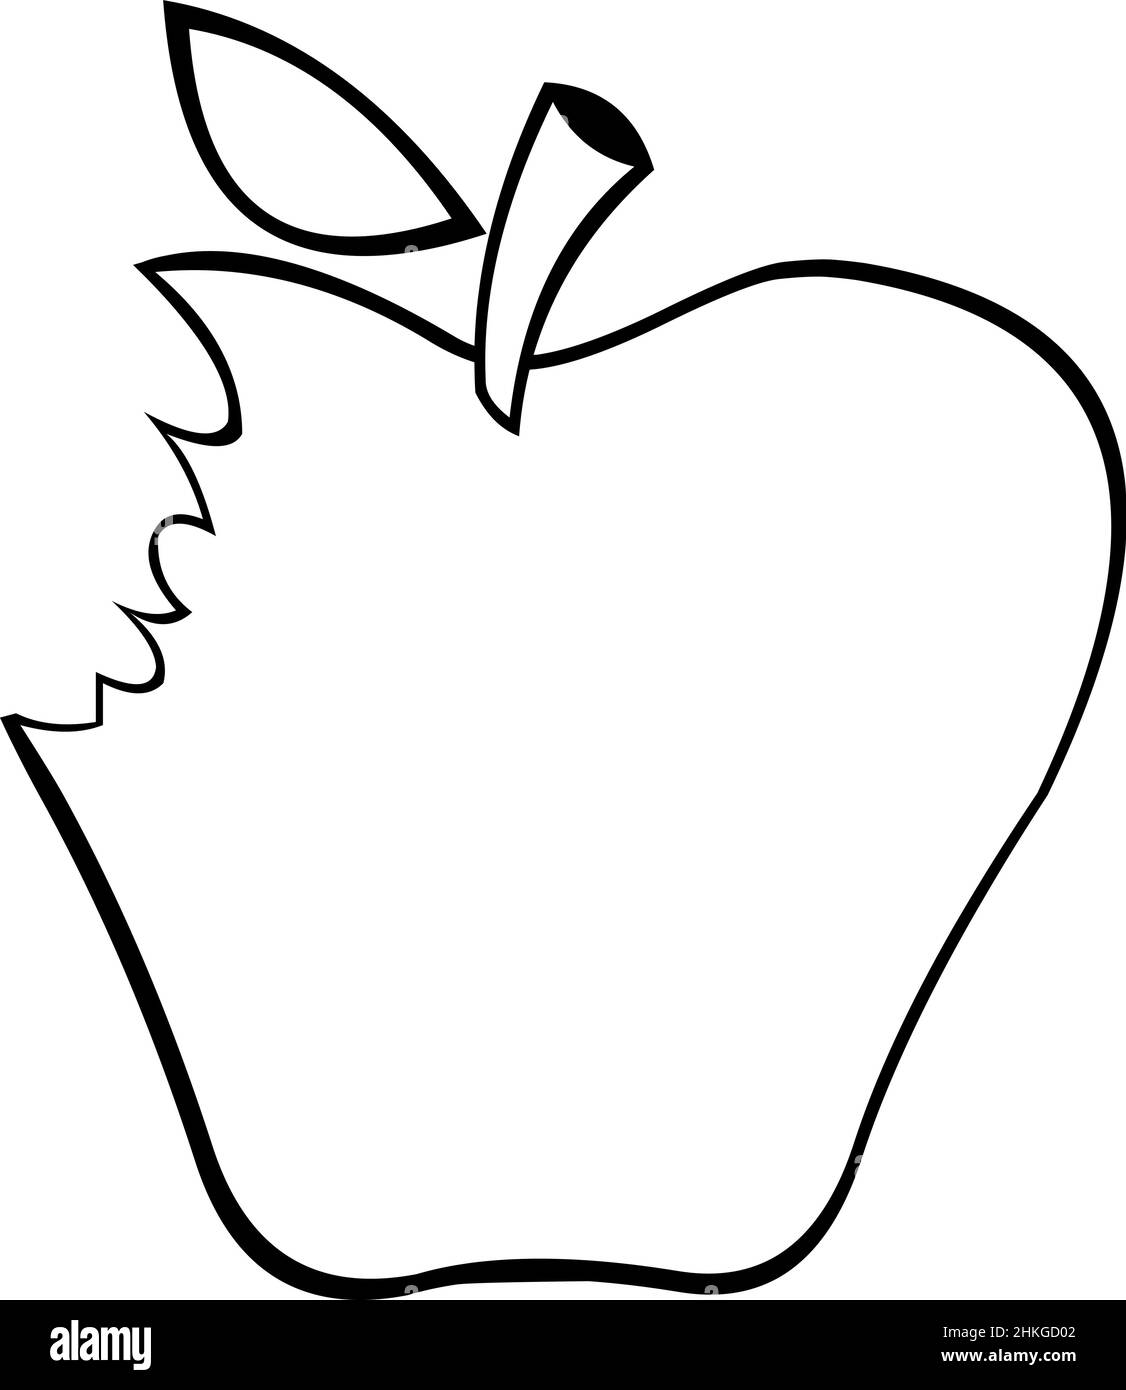 Vector illustration of a bitten apple drawn in black and white Stock Vector